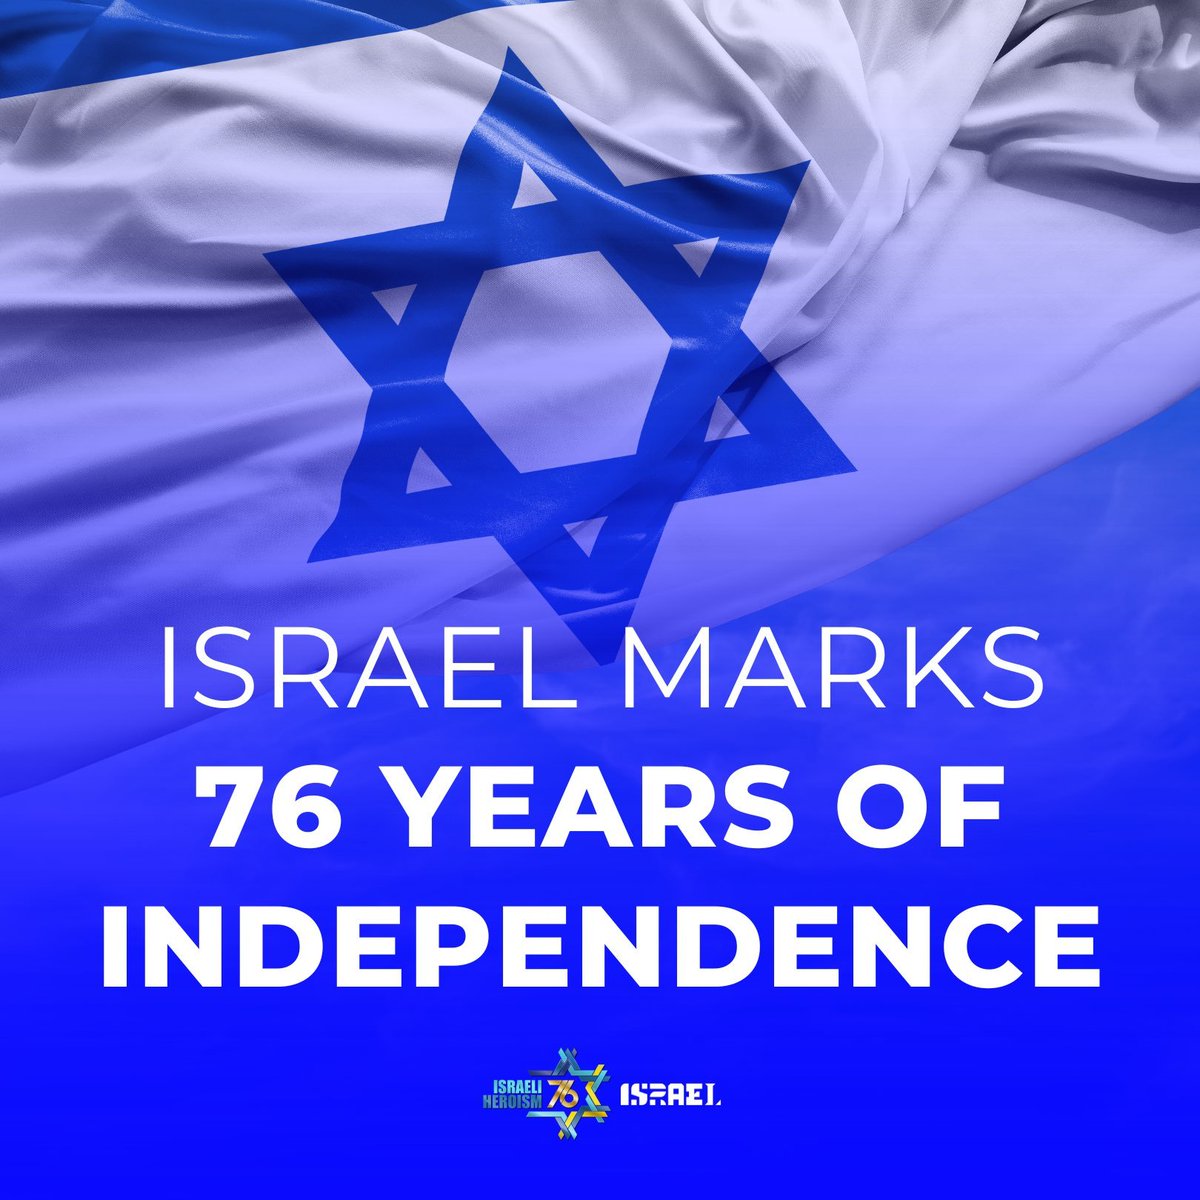 76 years young, 3,000 years old Many more years to come. Here’s to 76 years of independence 🇮🇱💙